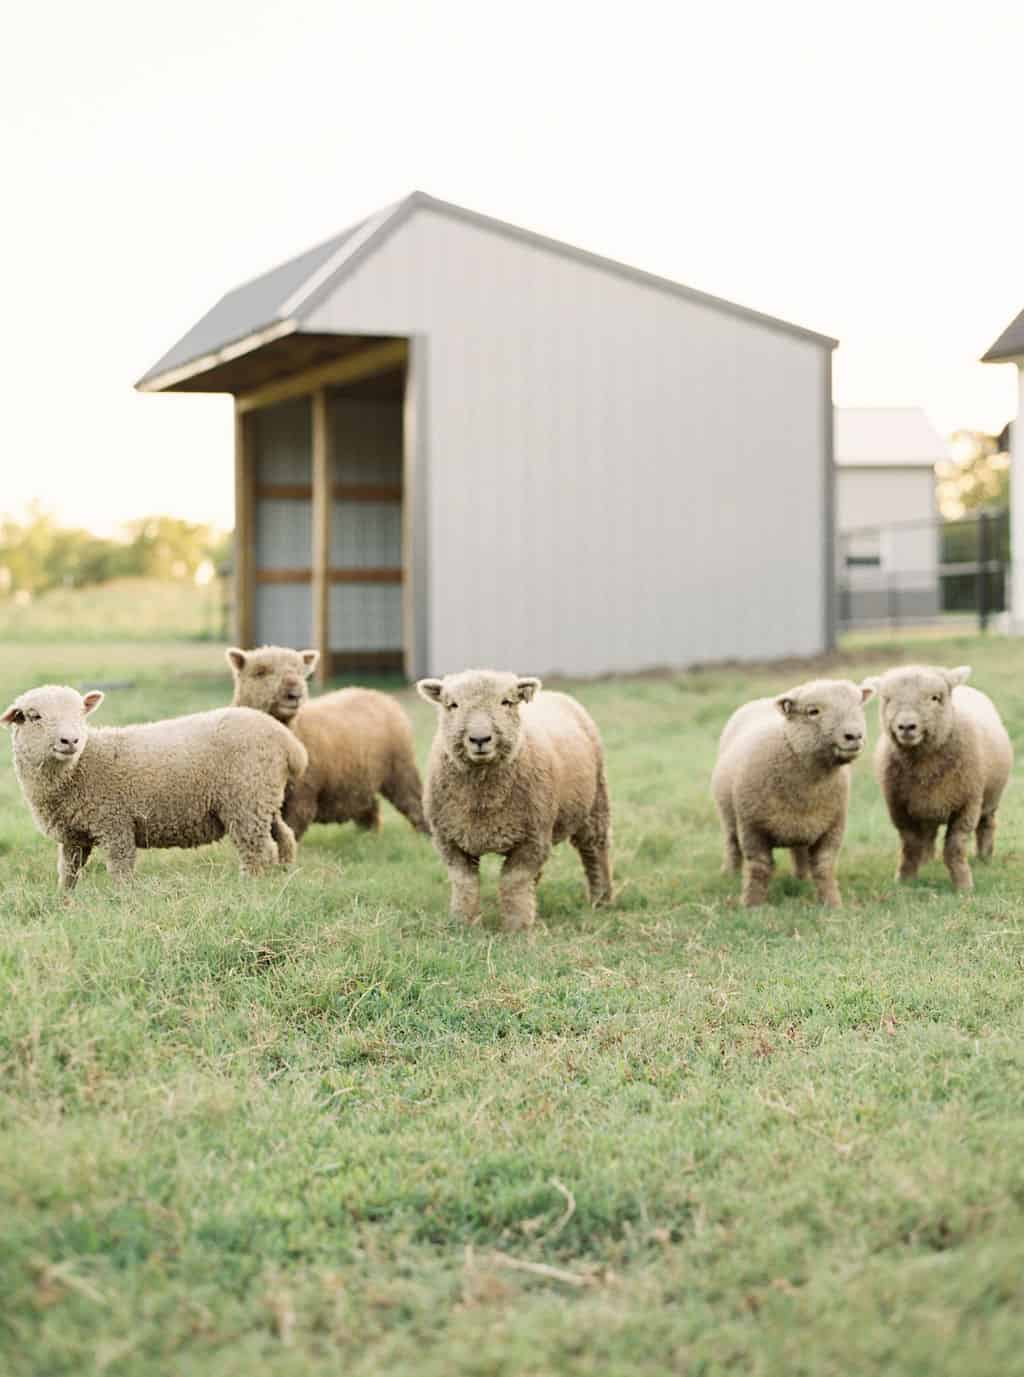 Babydoll Sheep Shelter | What sort of shelter do Babydoll Sheep need? Find out at Everly & Raine Co. by Katie O. Selvidge
